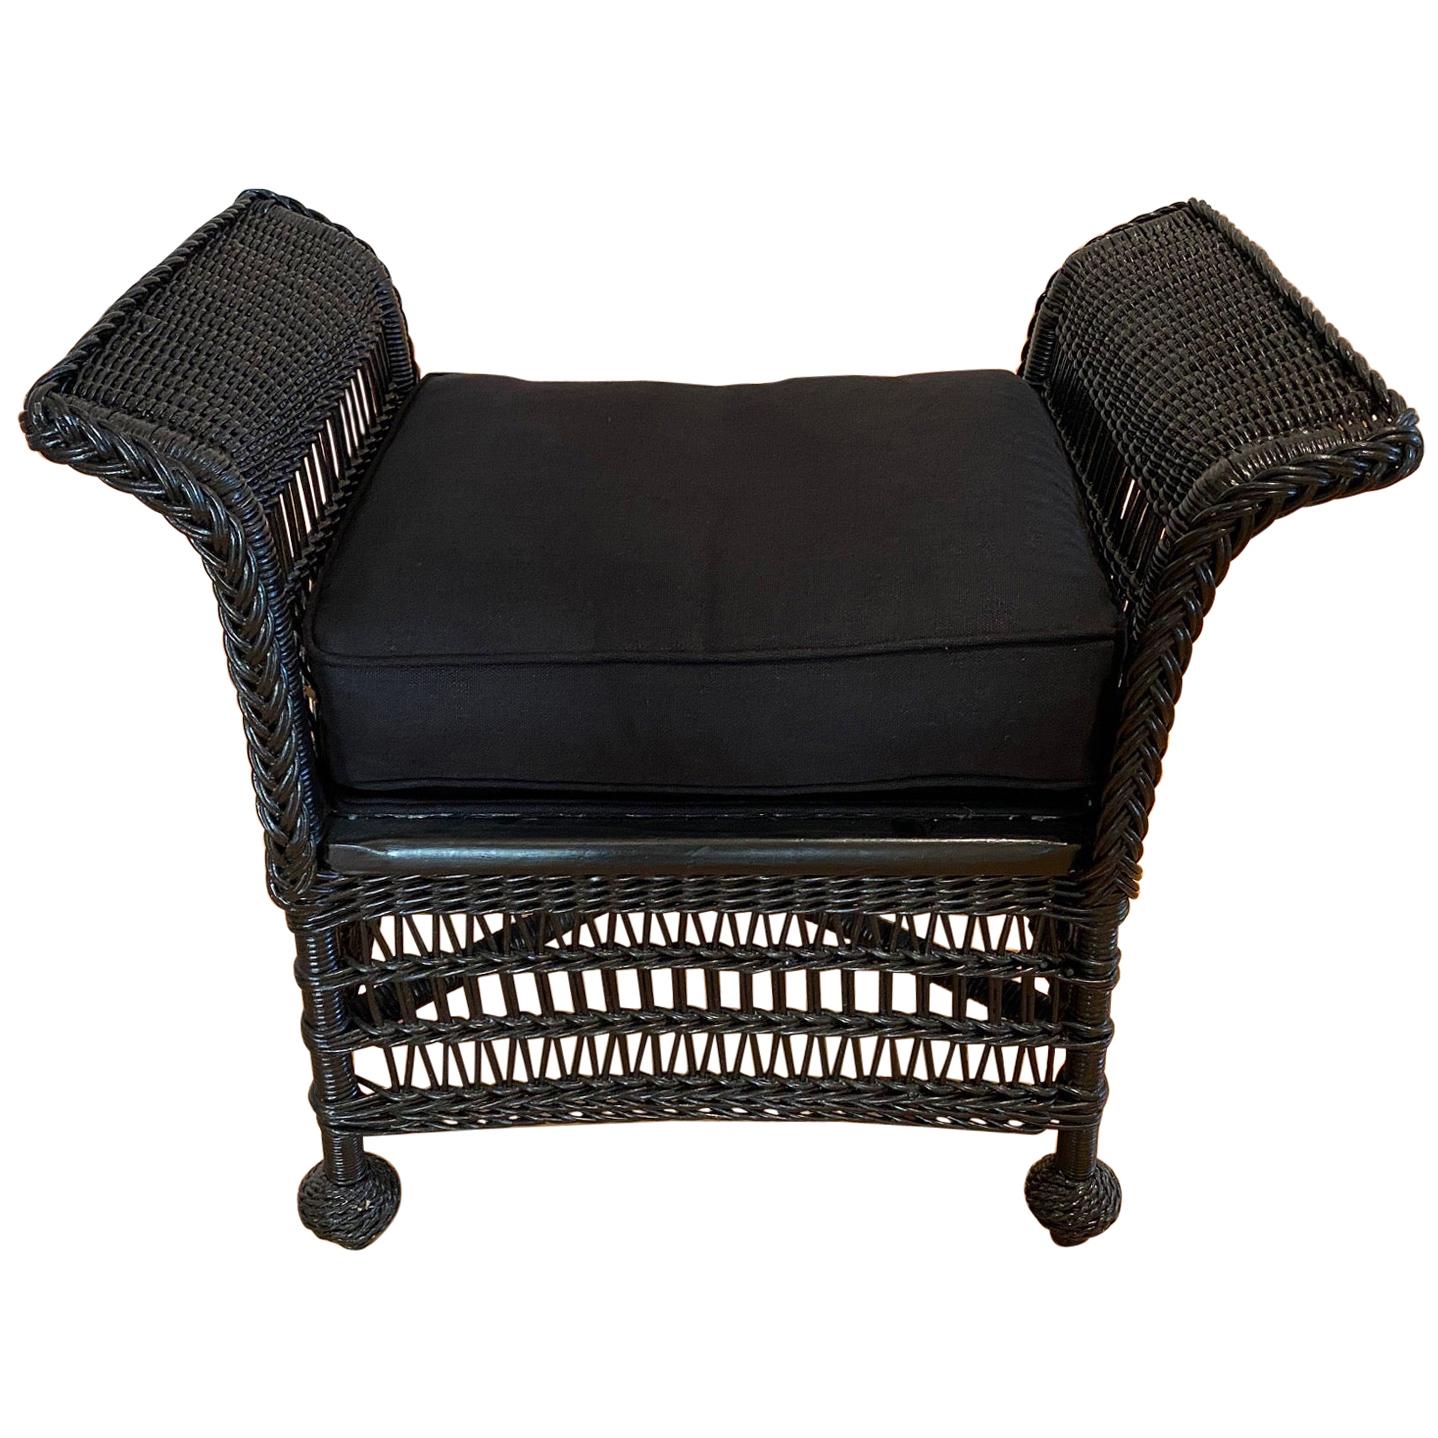 Vintage Wicker Bench or Footstool in Black Finish